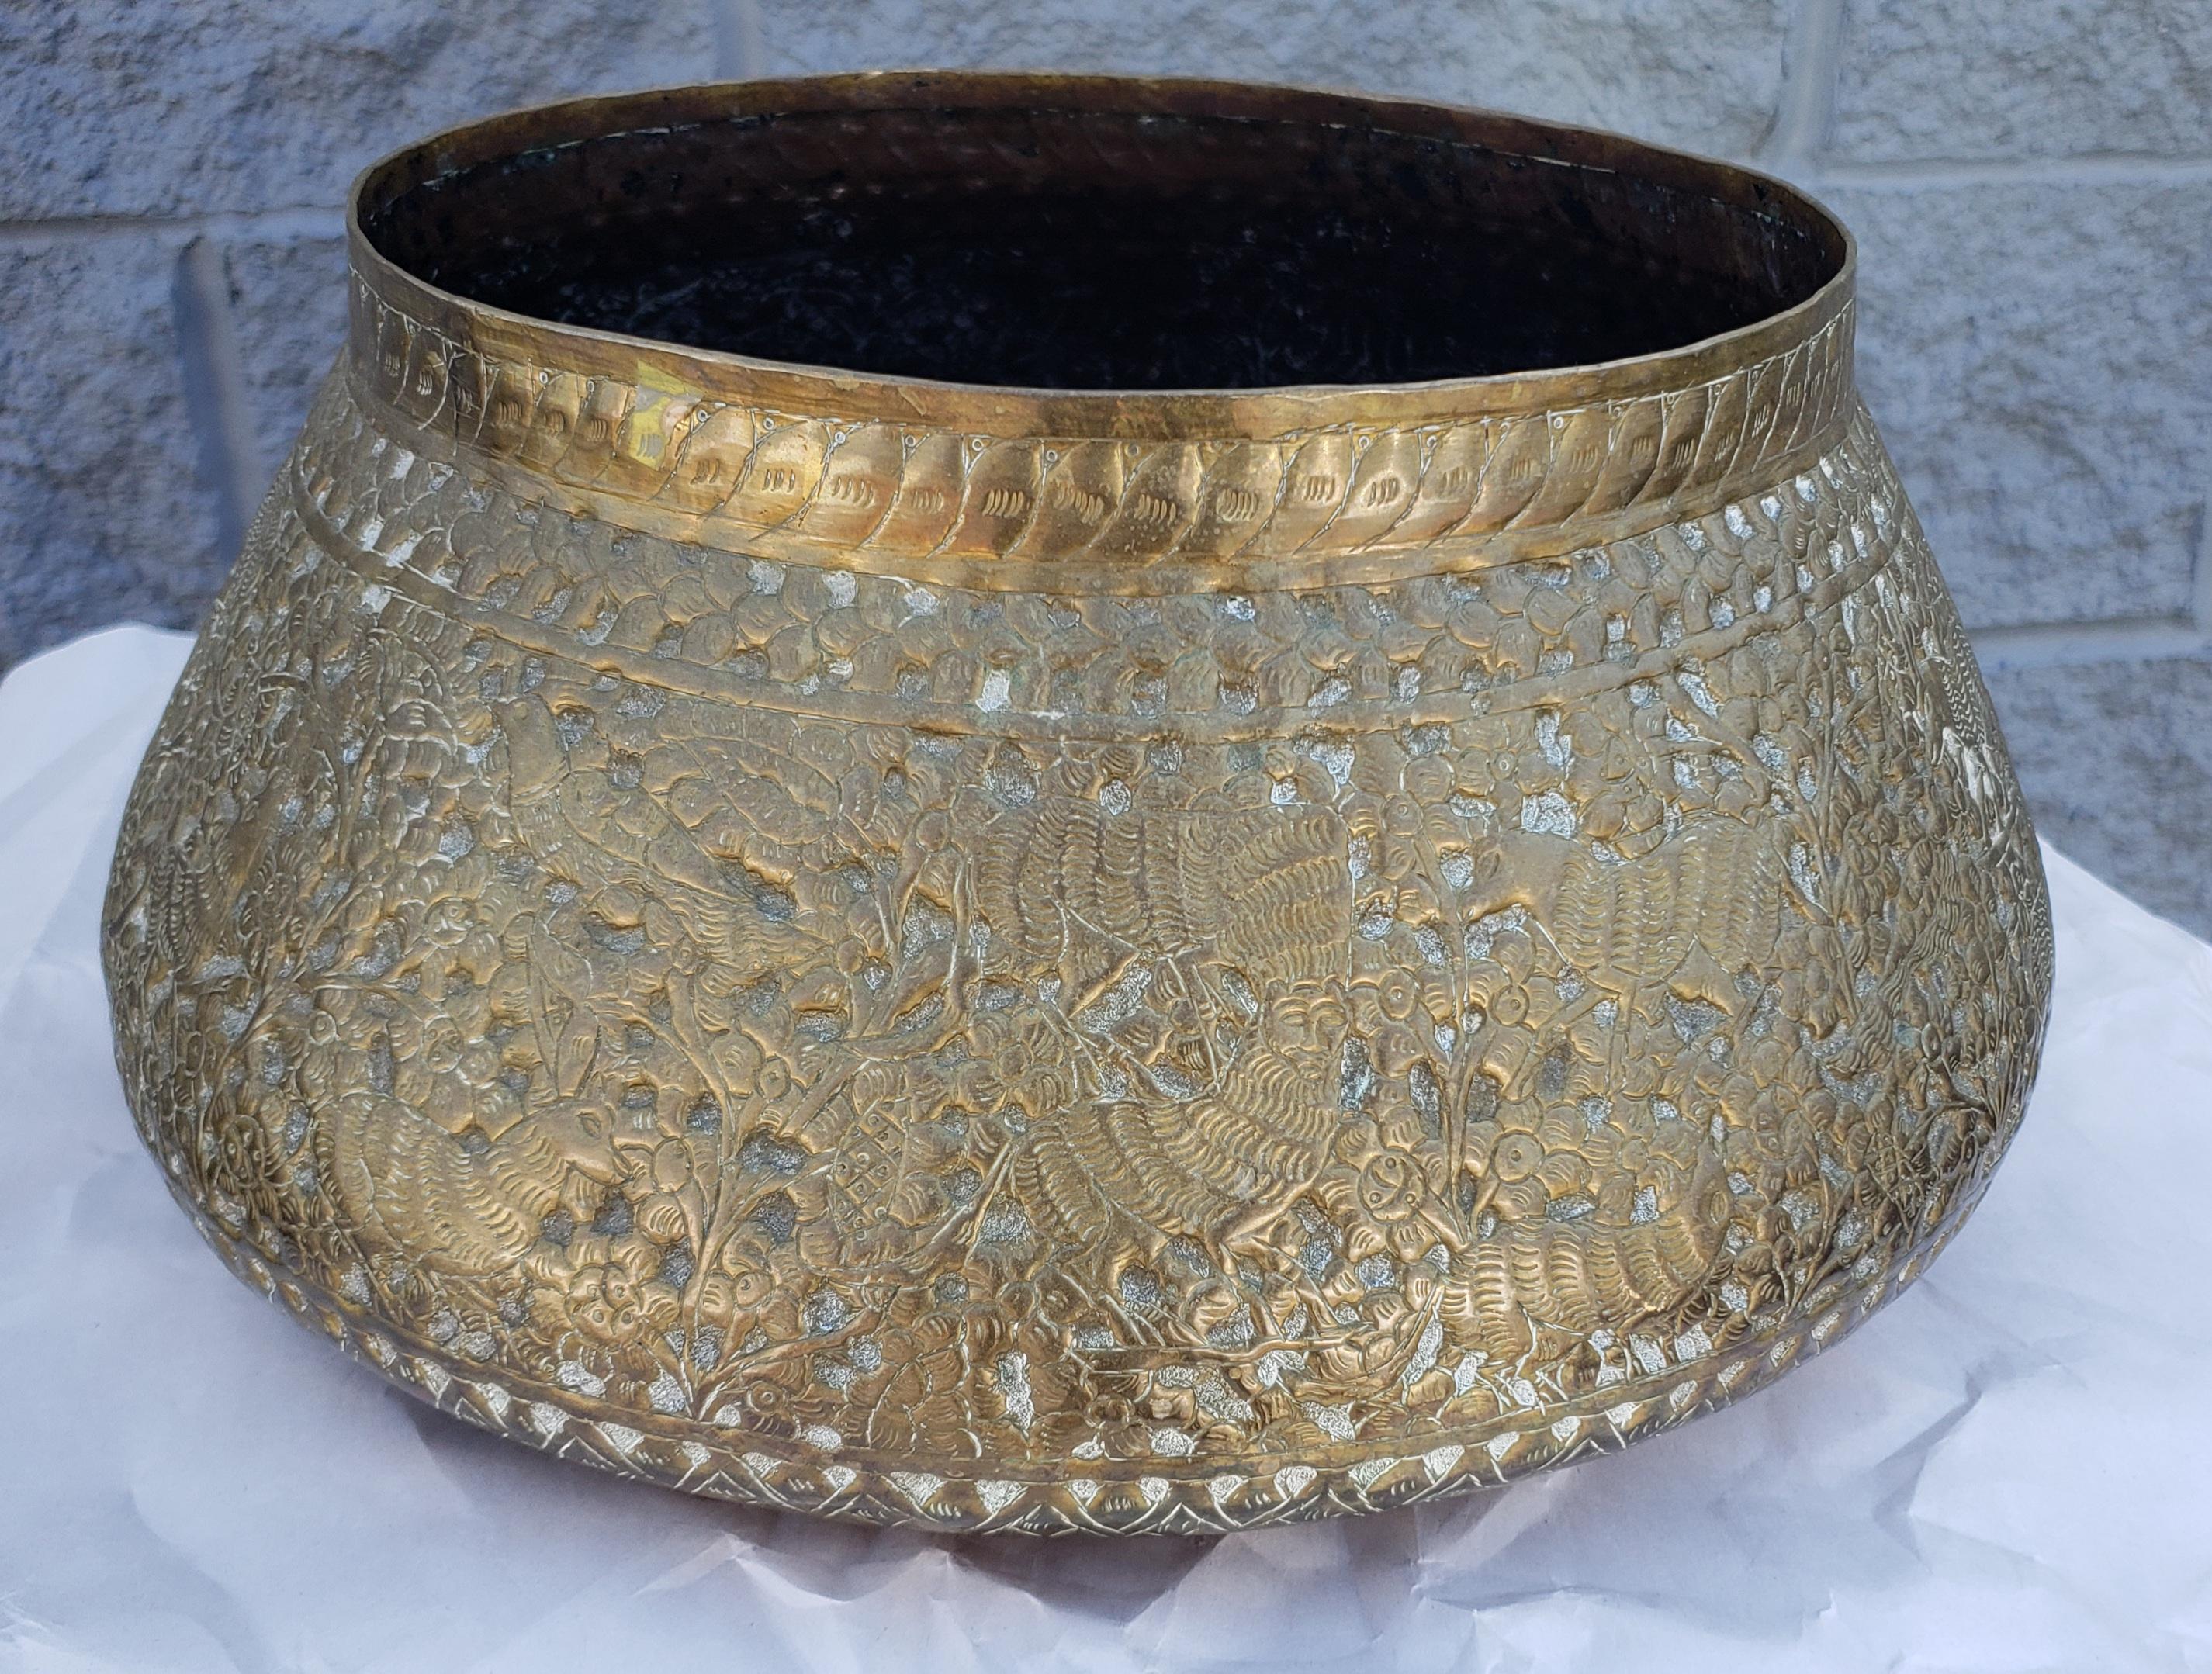 Indian Repoussé & Engraved Brass Bowl / Planter on Engraved Brass Stand / Stool For Sale 2